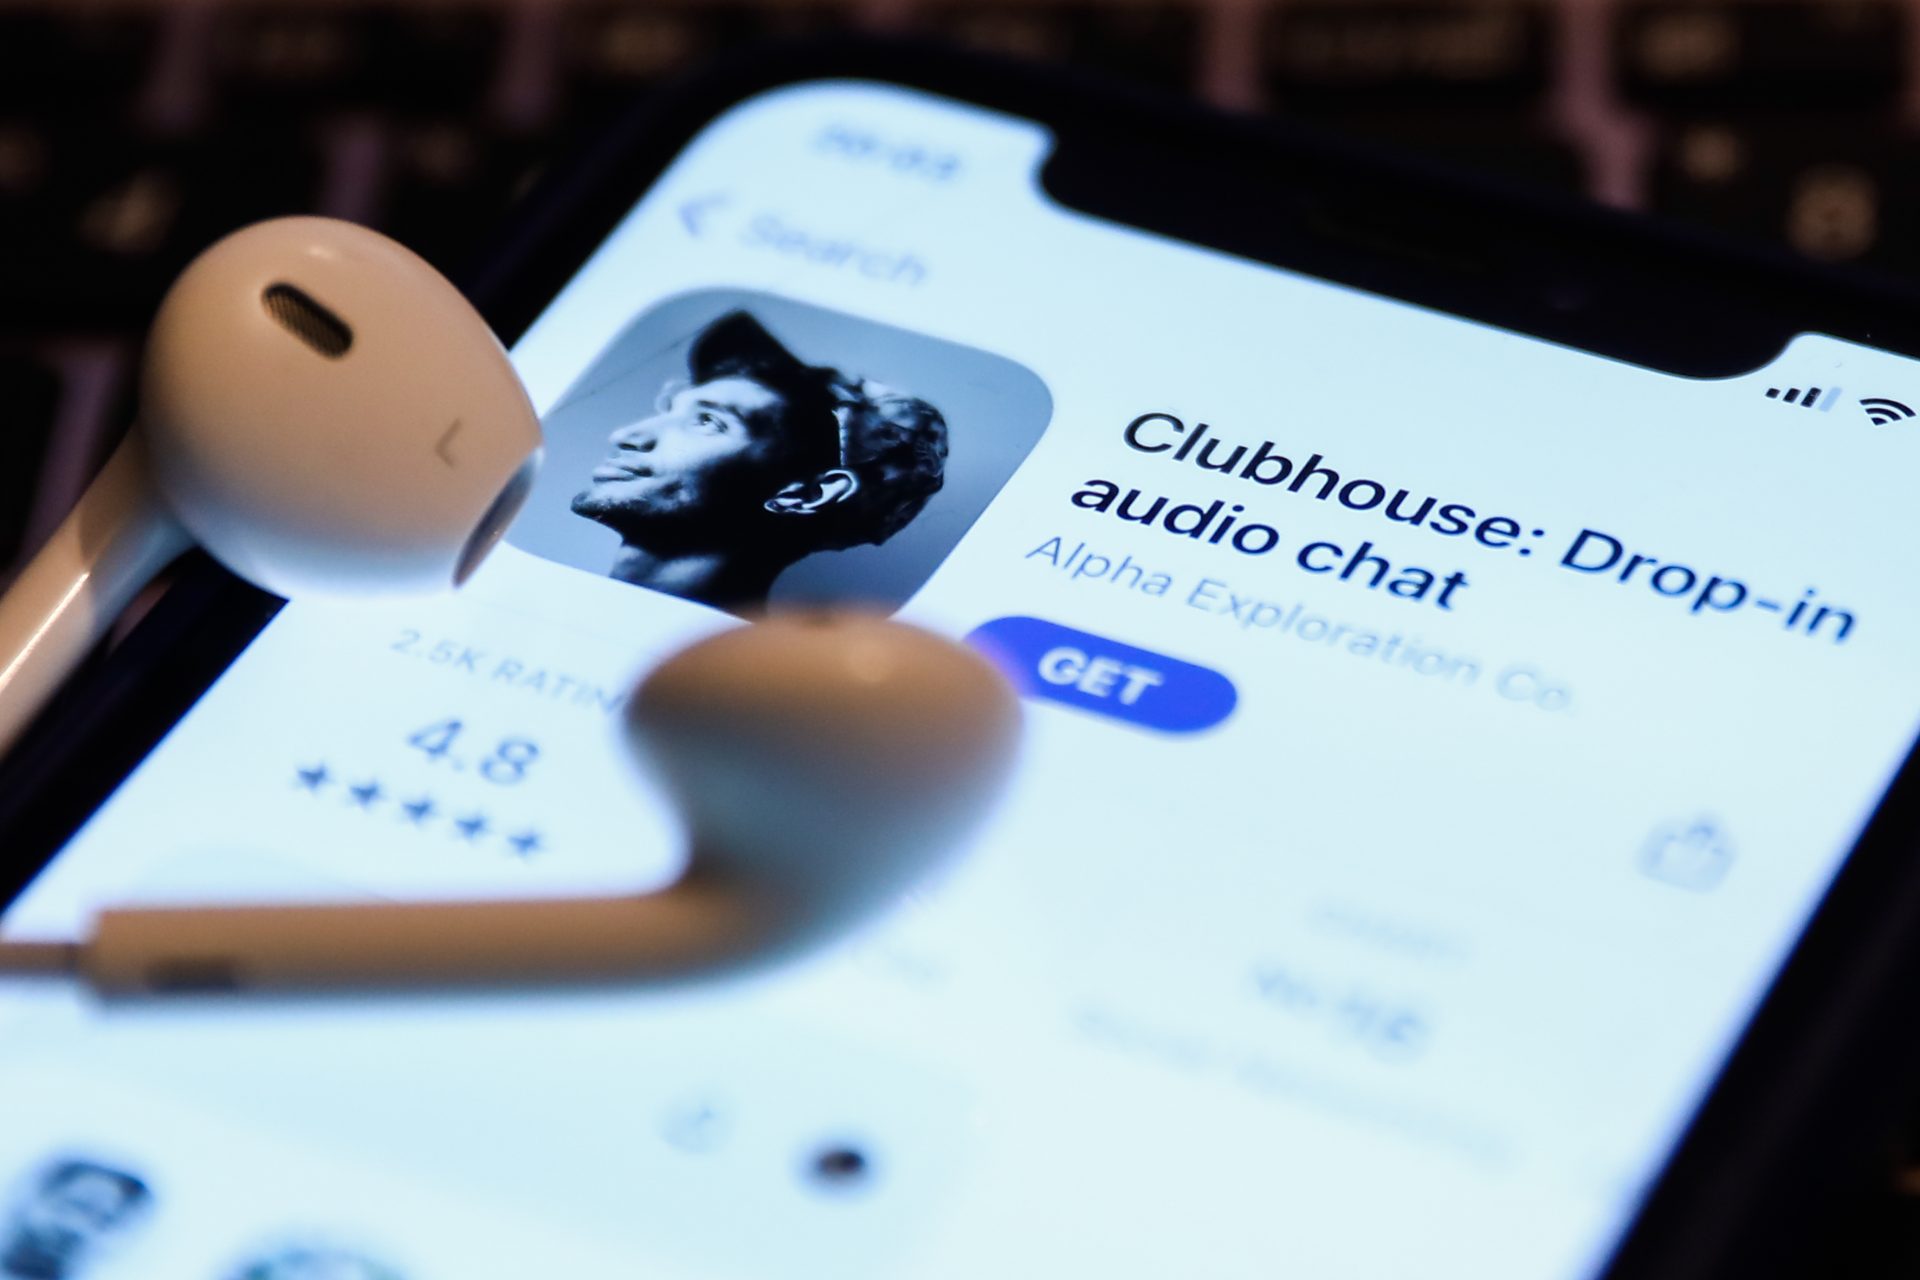 TED will provide uncommon audio chats on Clubhouse